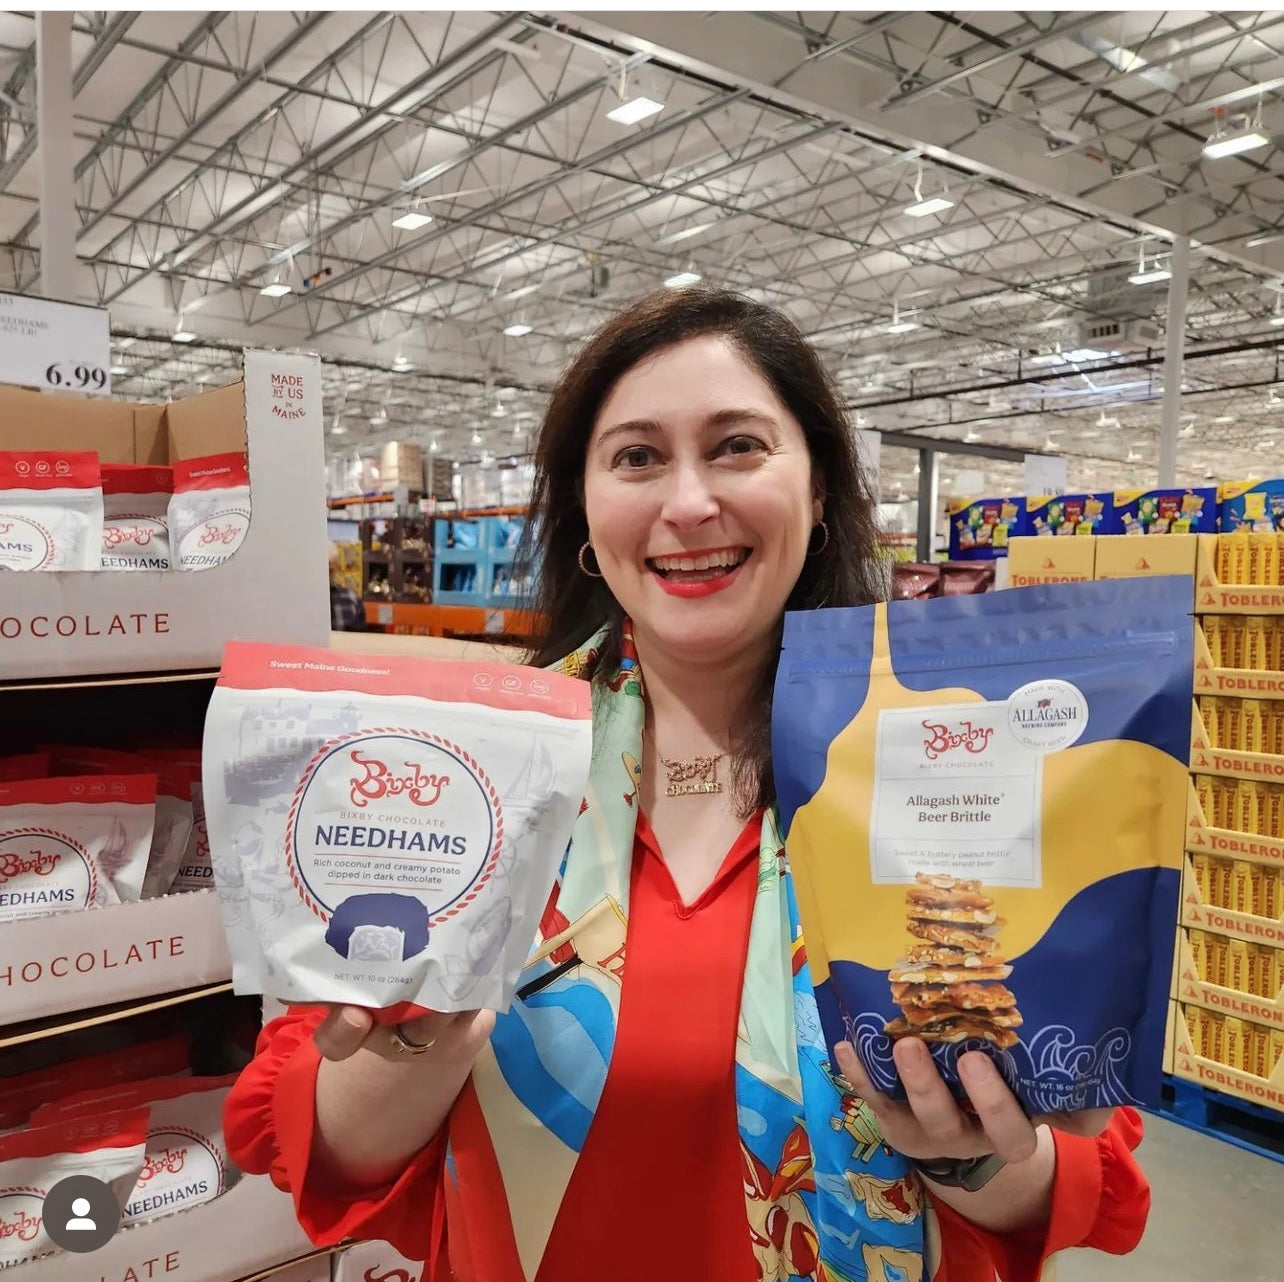 Bixby Chocolate Launches into Maine's First Costco Store